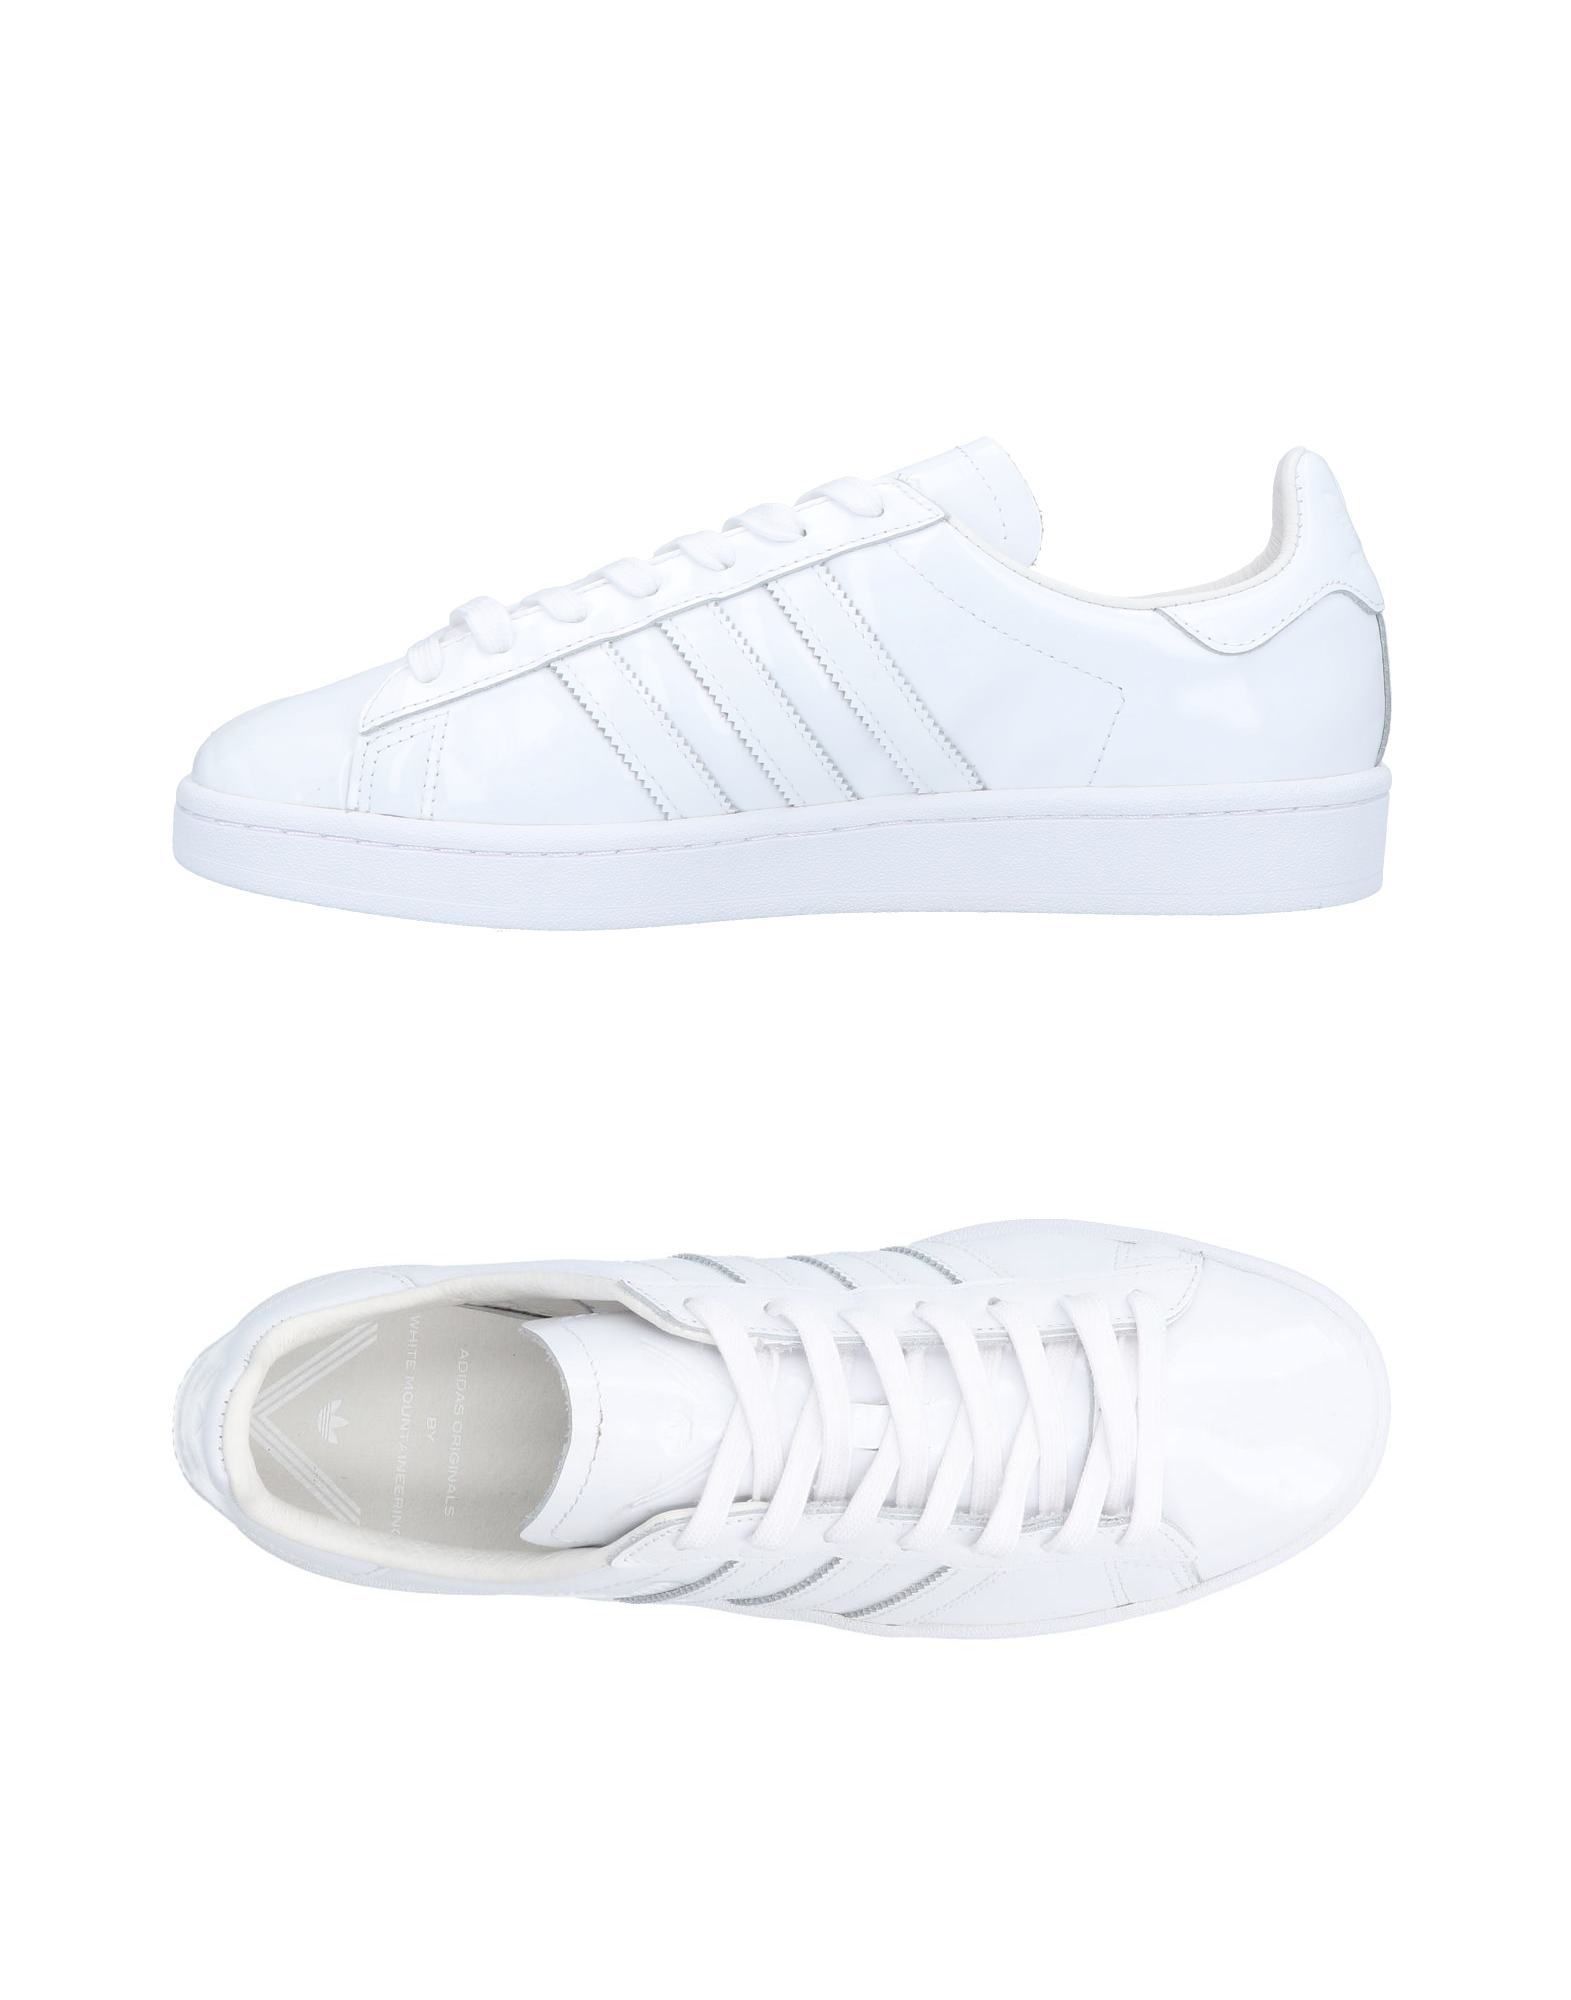 ADIDAS ORIGINALS by WHITE MOUNTAINEERING Sneakers | YOOX (US)